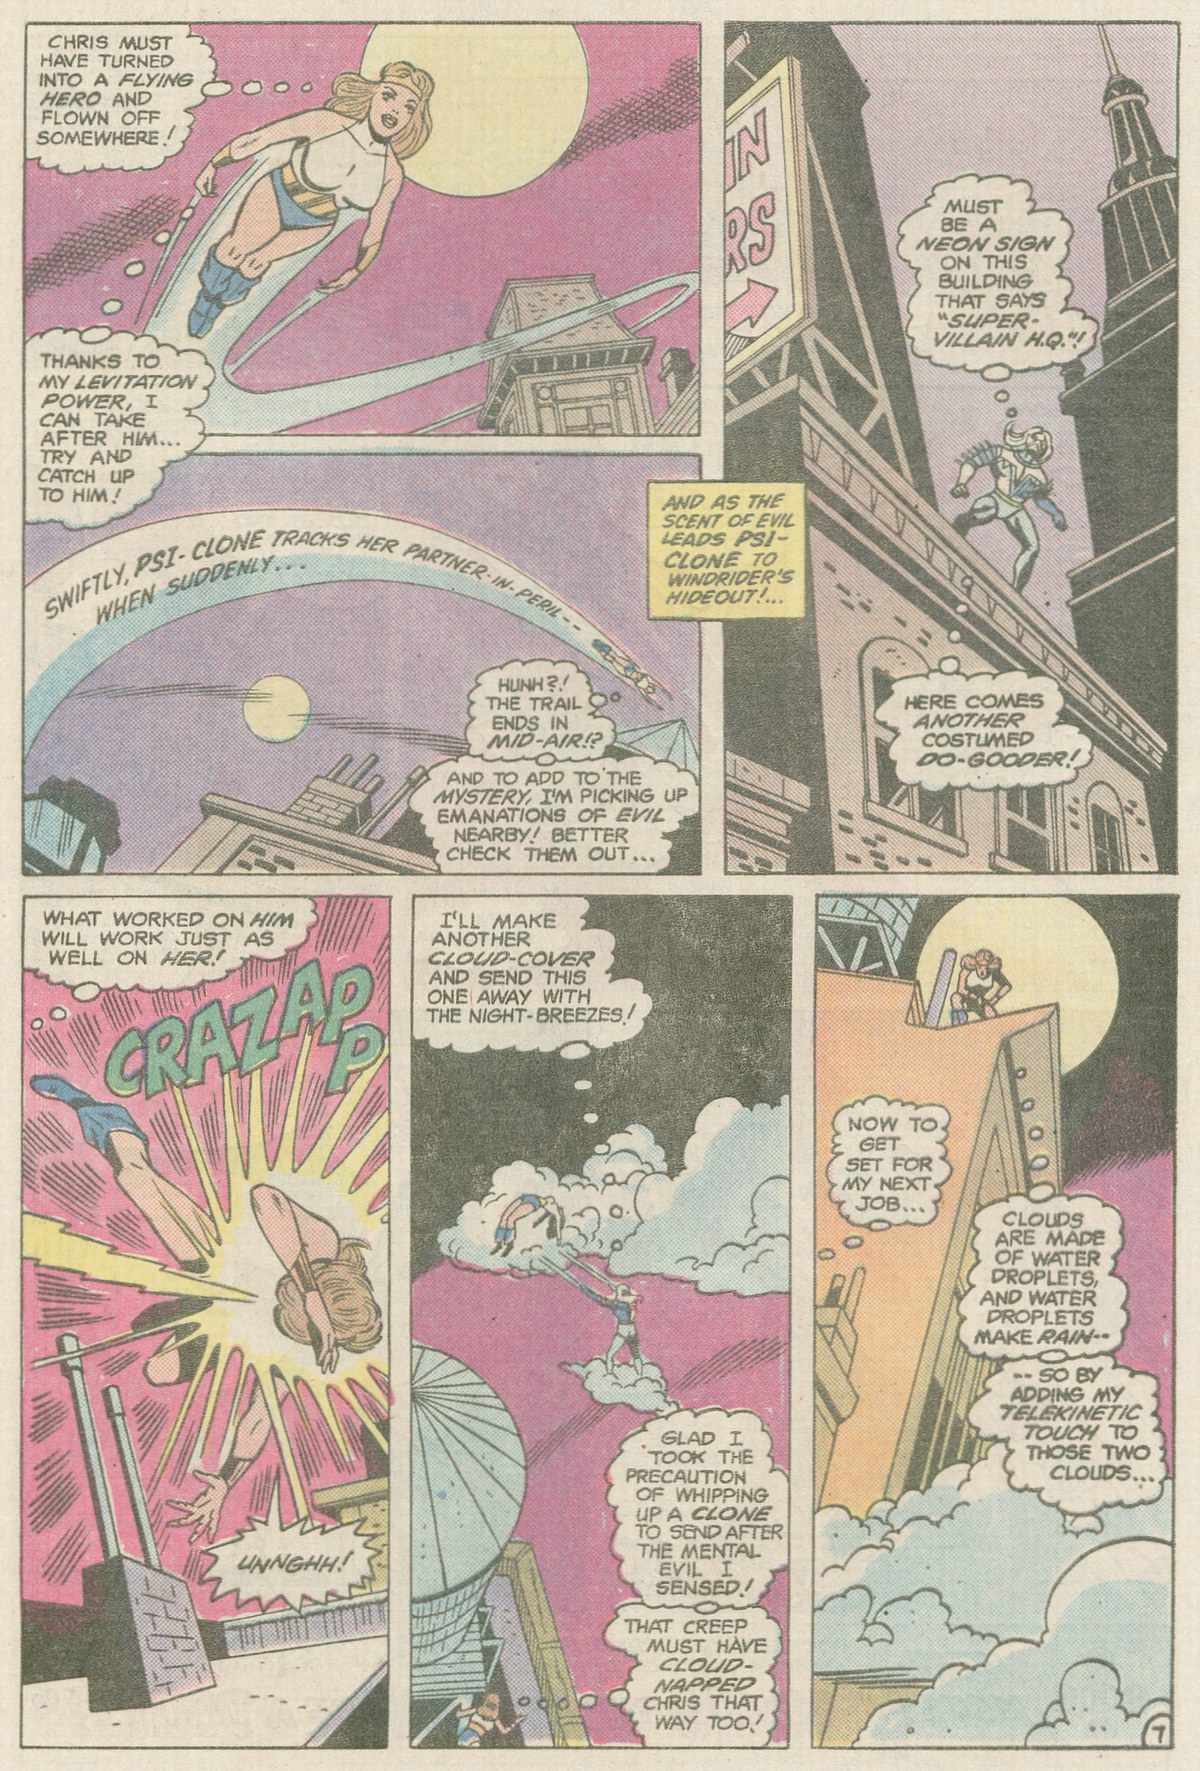 The New Adventures of Superboy 38 Page 25